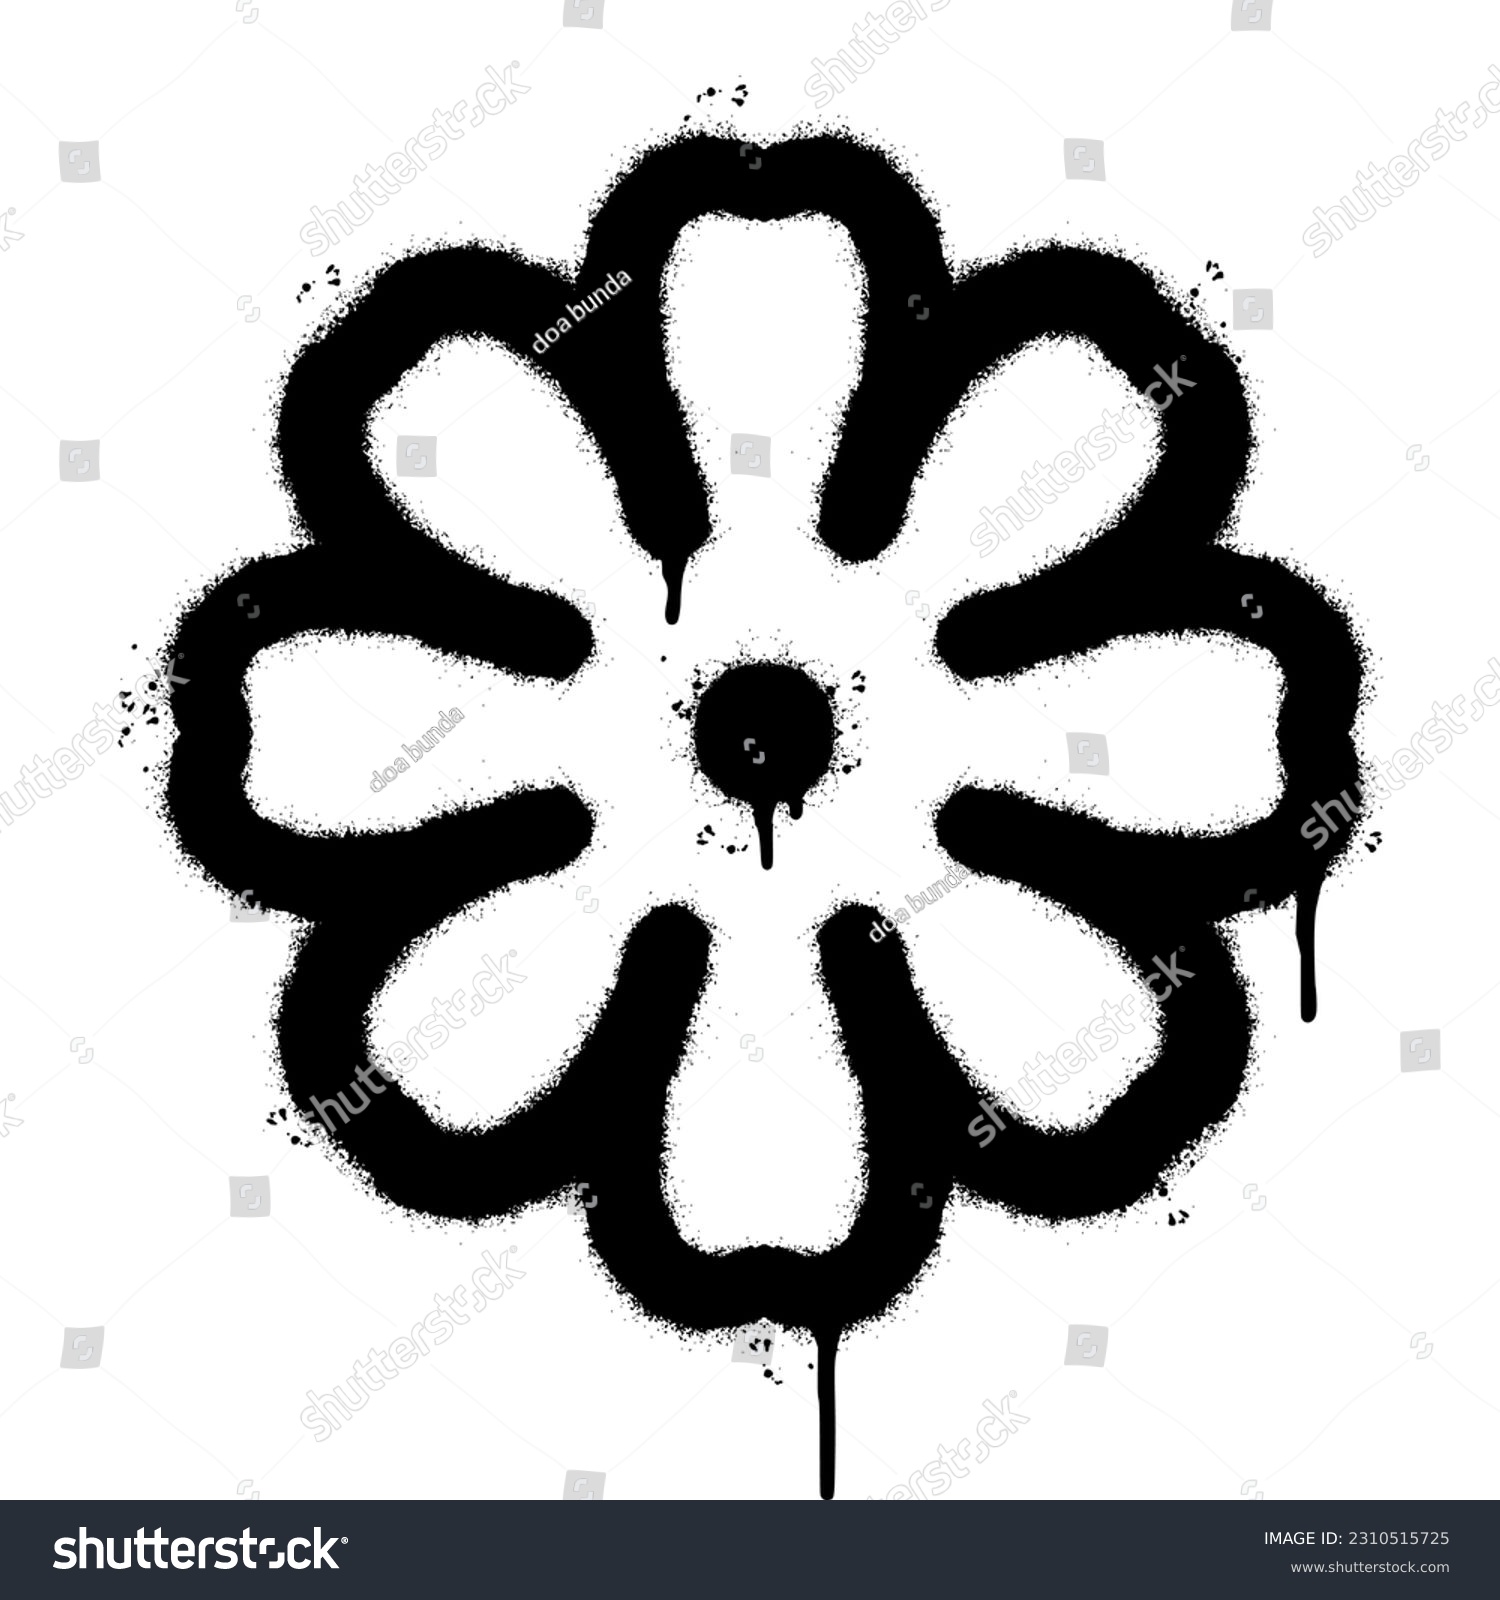 SVG of Spray Painted Graffiti flower icon Sprayed isolated with a white background. graffiti flower symbol with over spray in black over white.  svg